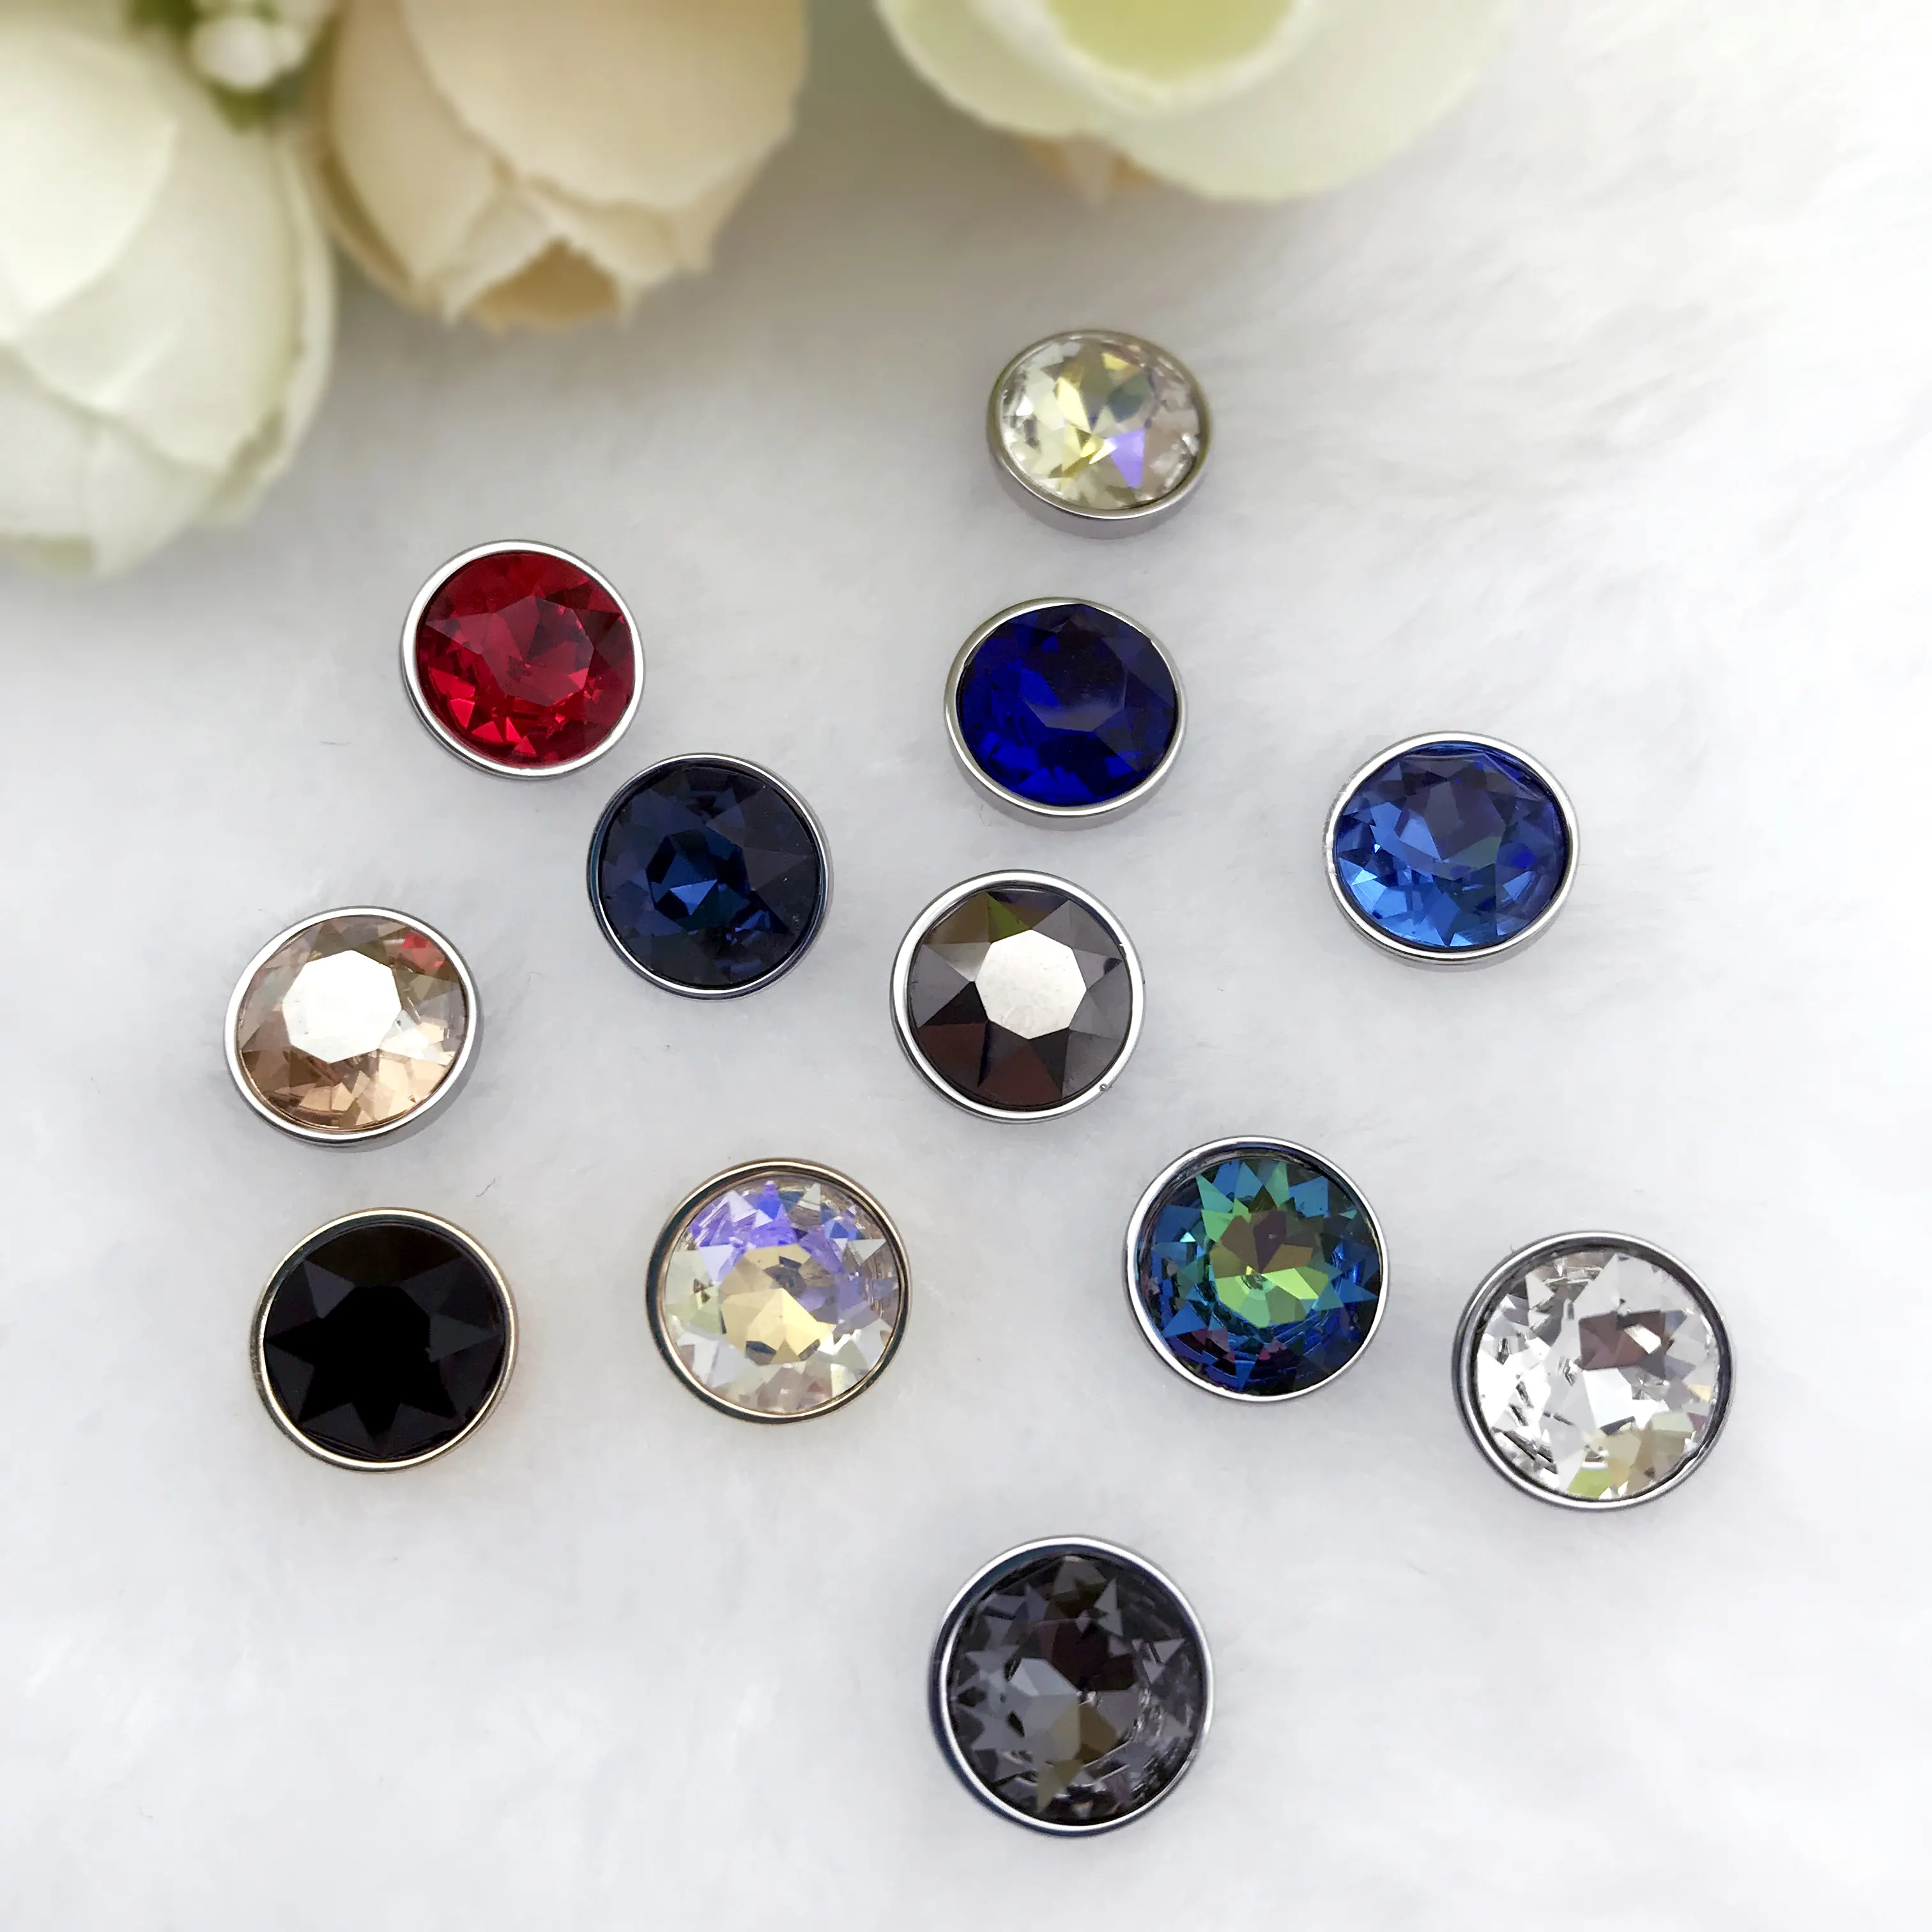 11.3mm Diamond shape rhinestone buttons with setting for garments